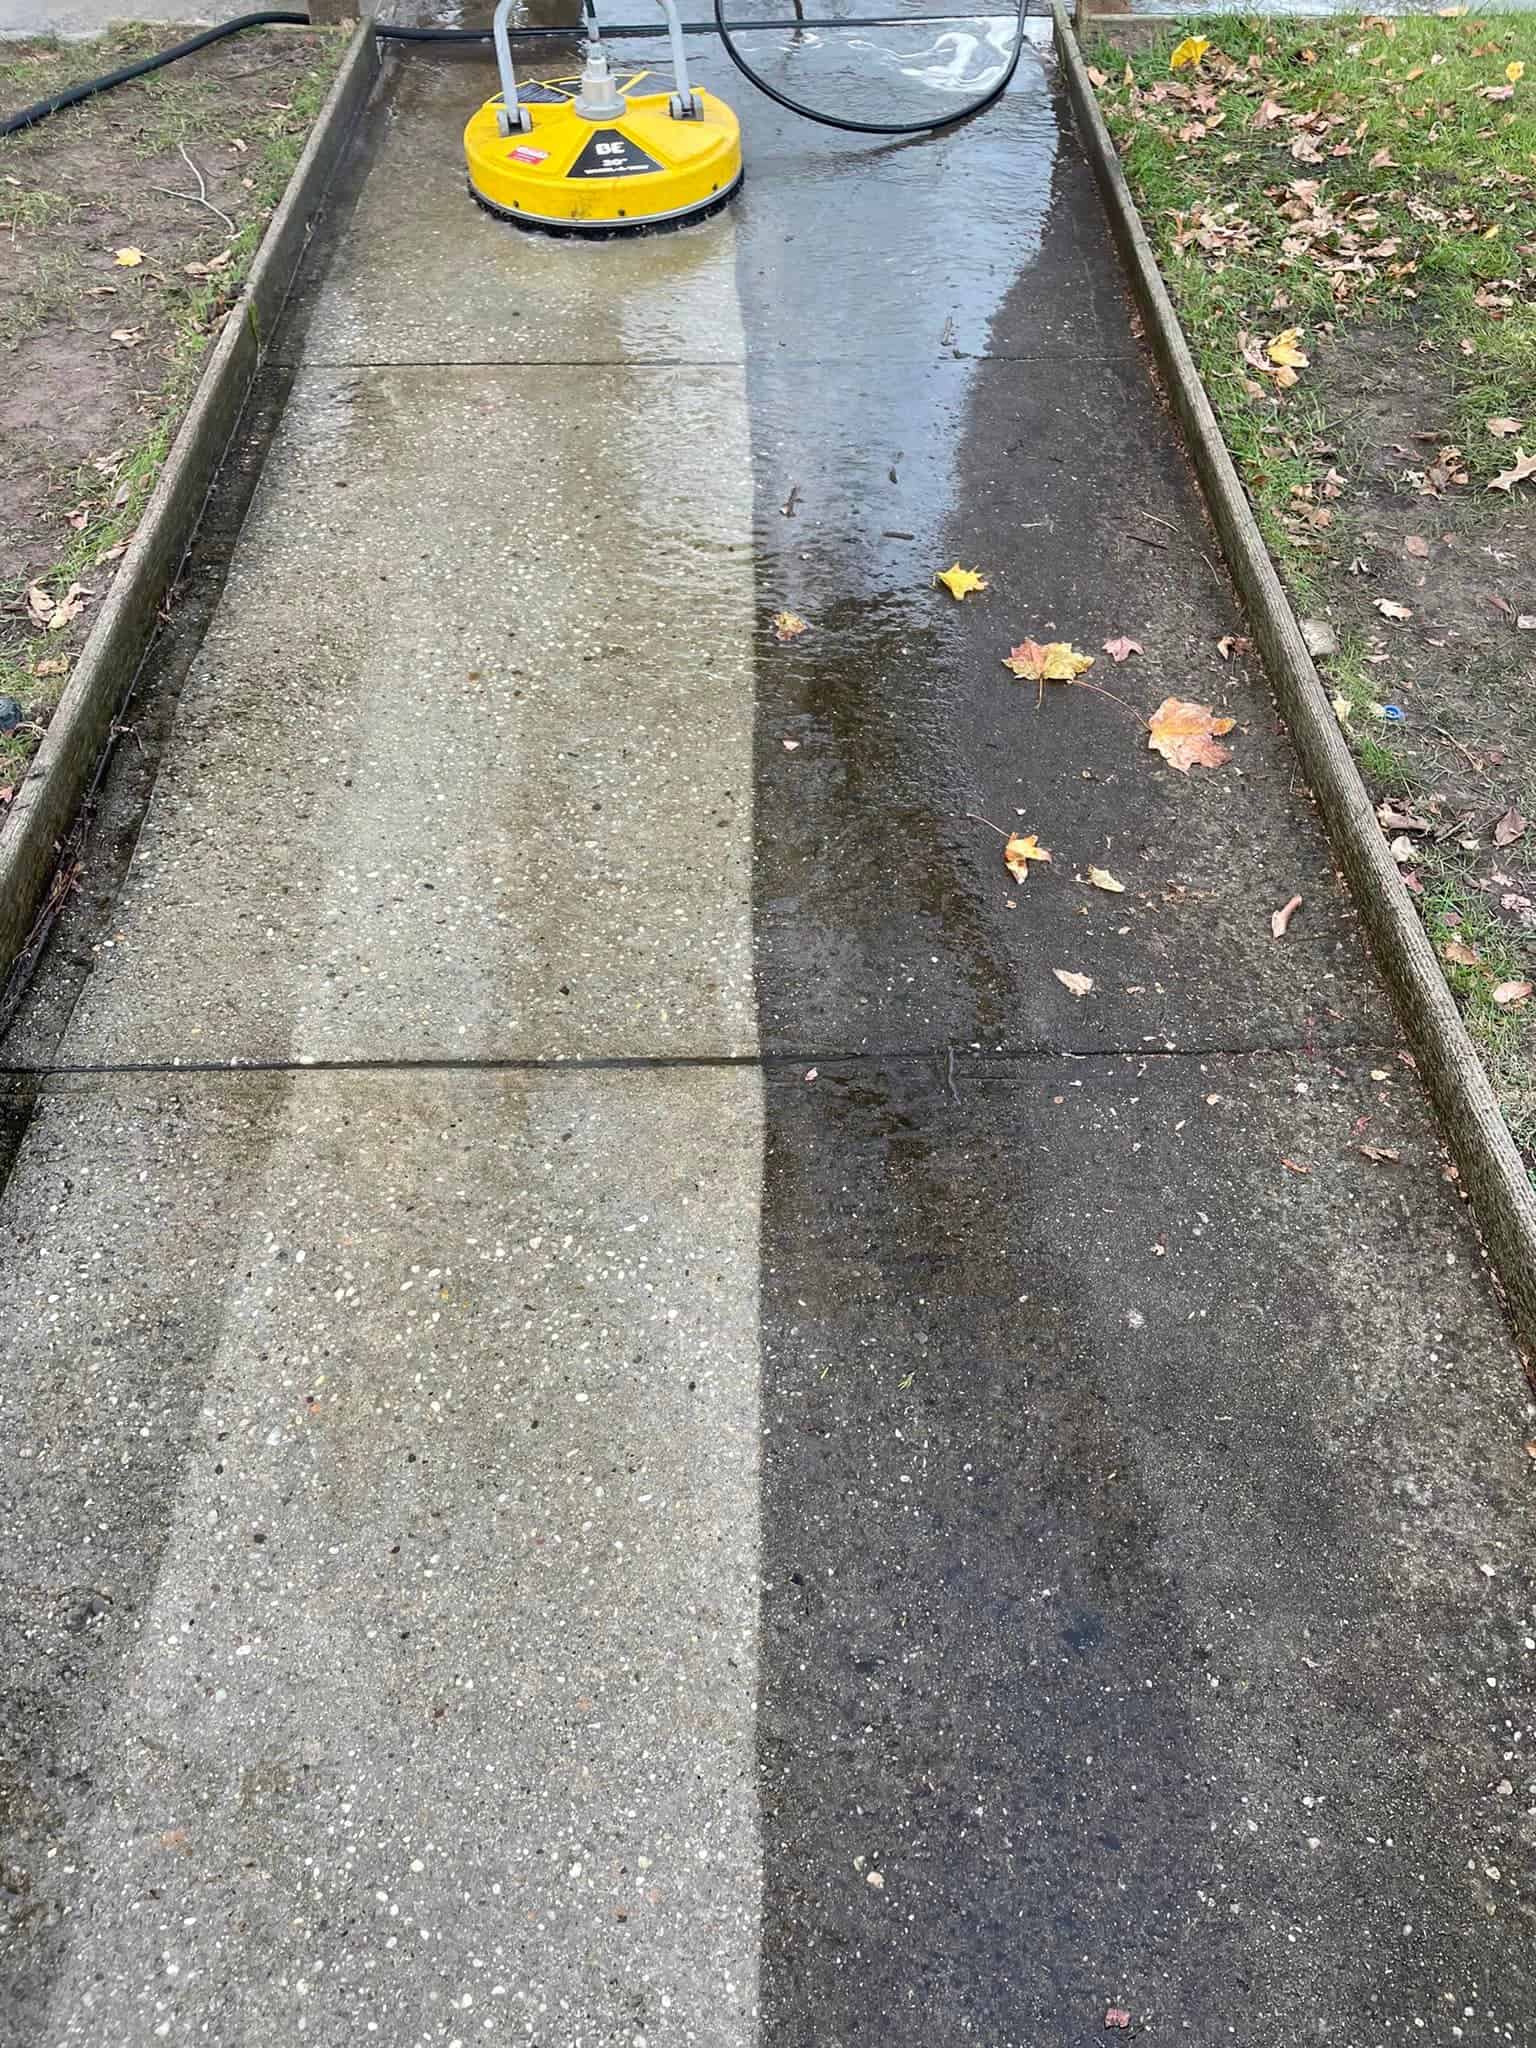 Power Washing Services Near Me in Brentwood, NY